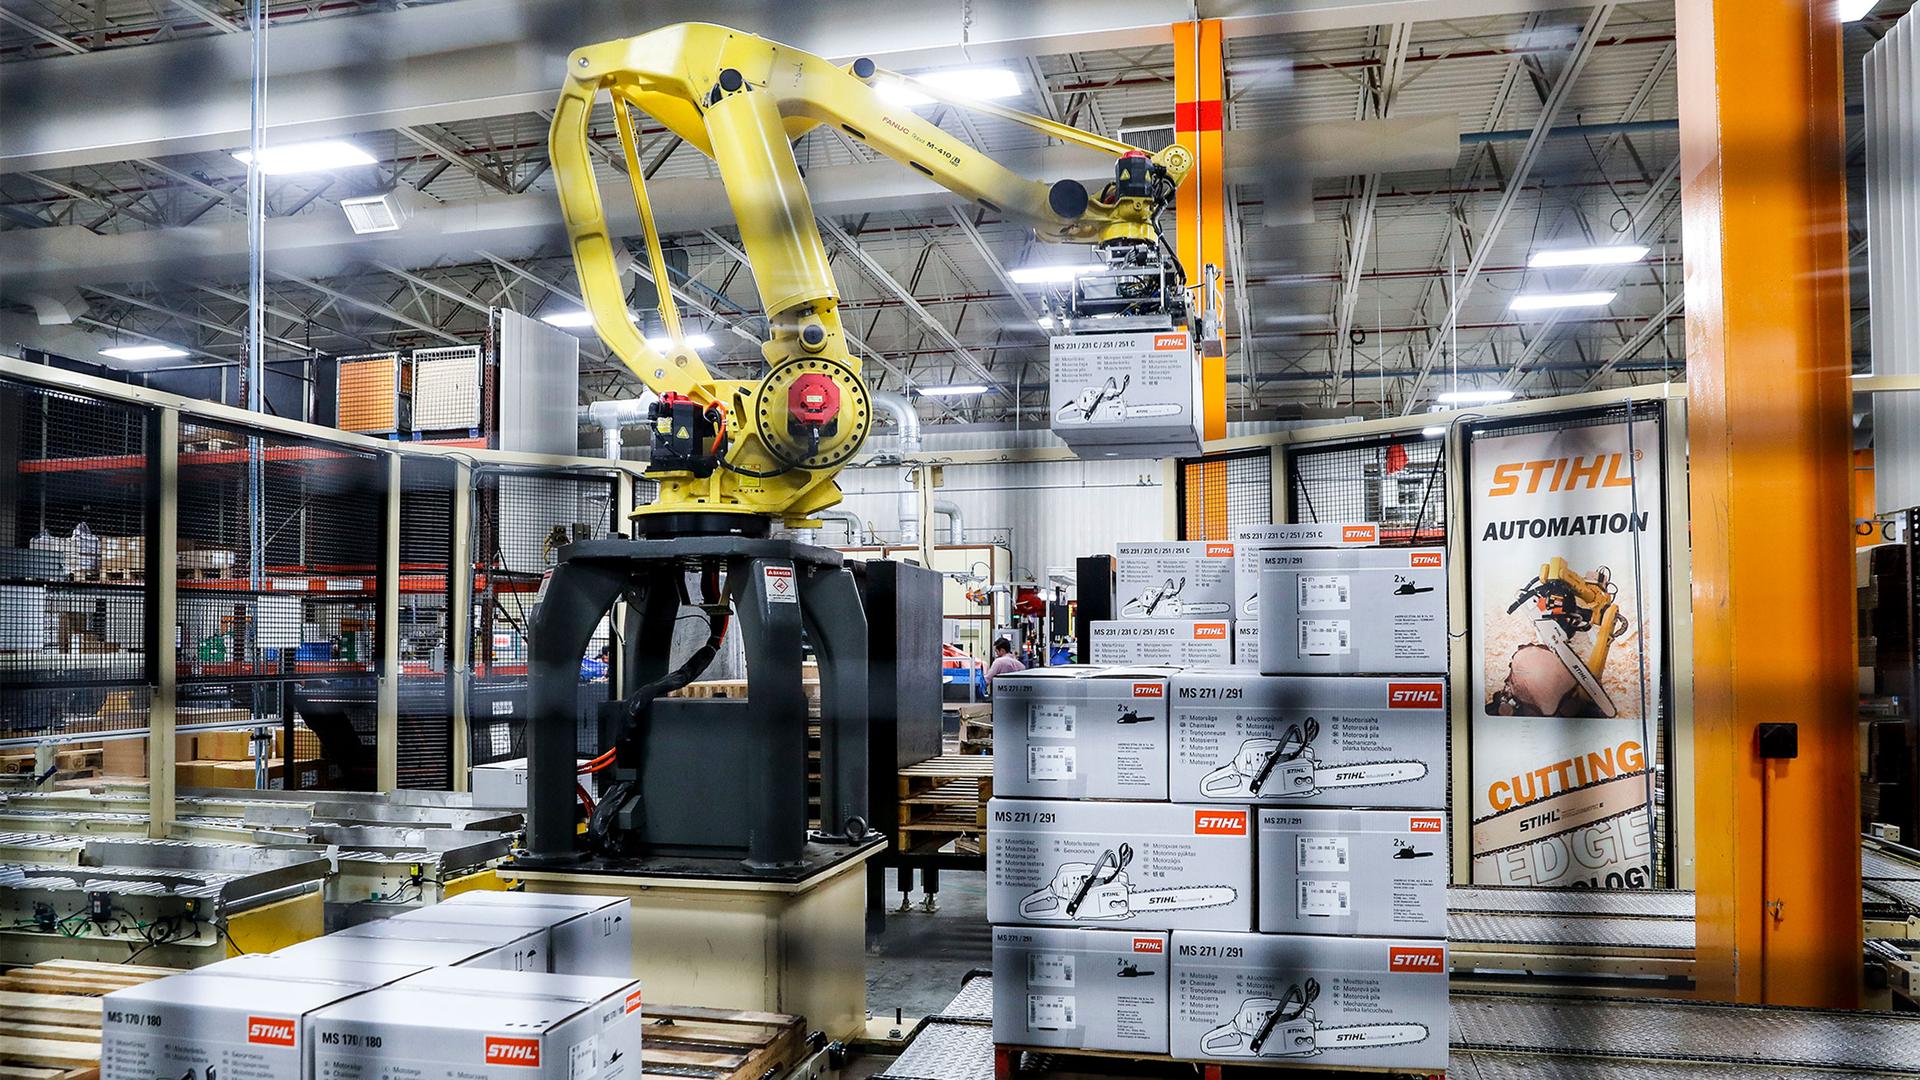 A giant robotic arm loads pallets full of chainsaws prepared for shipping at the Stihl Inc. production plant in Virginia Beach, Va.